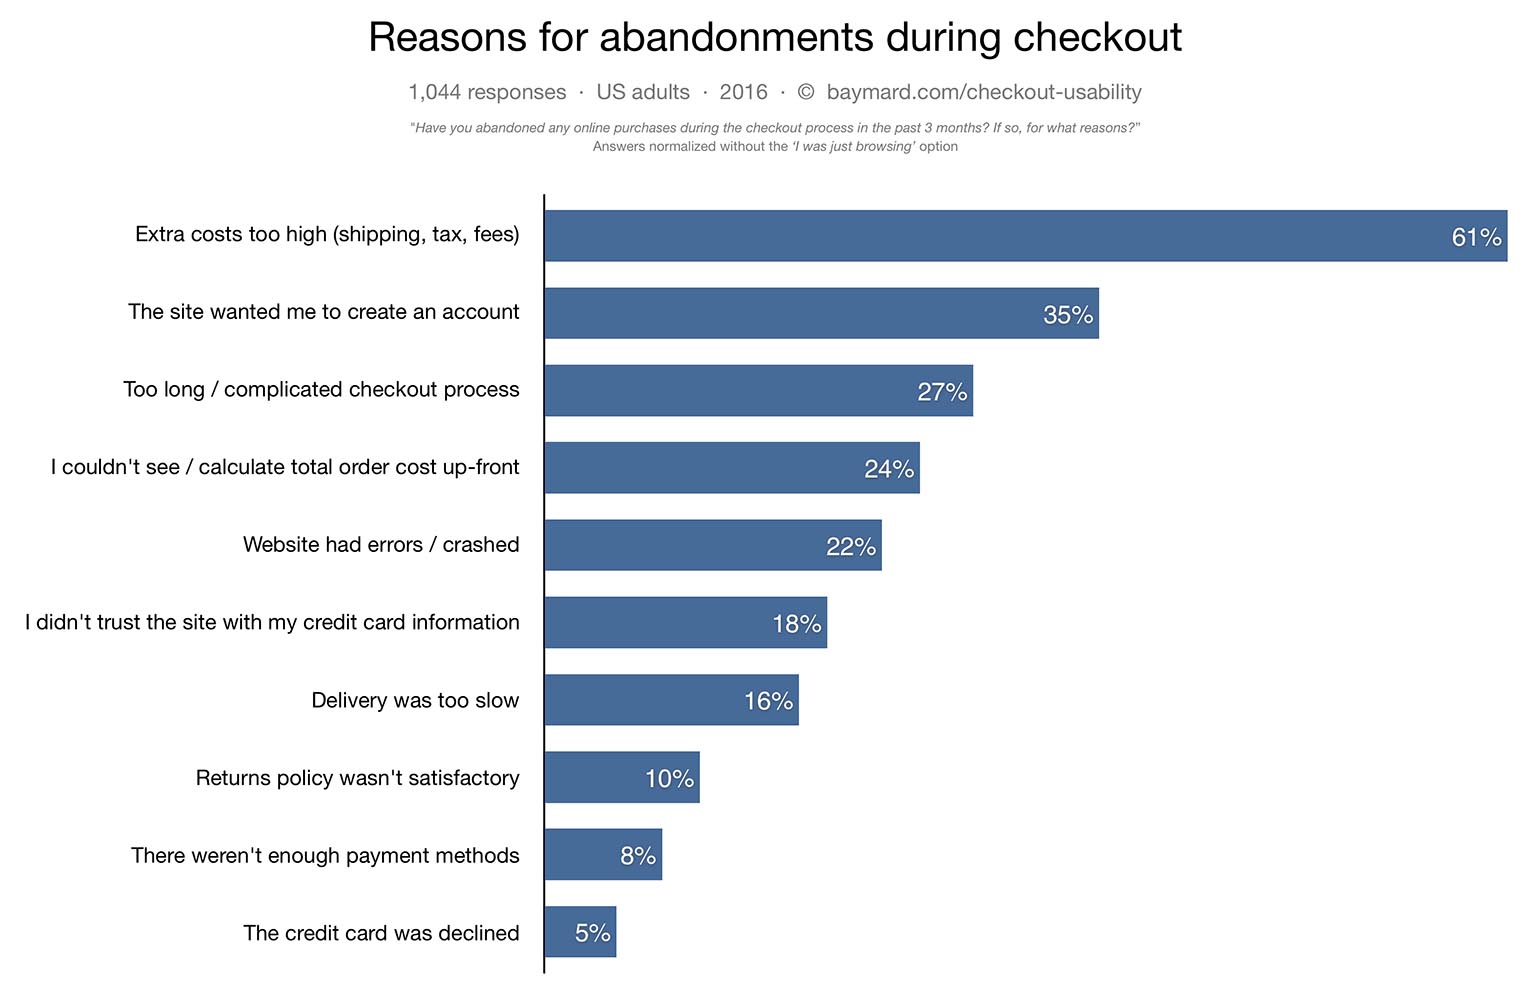 Reasons for Abandonment's During Checkout